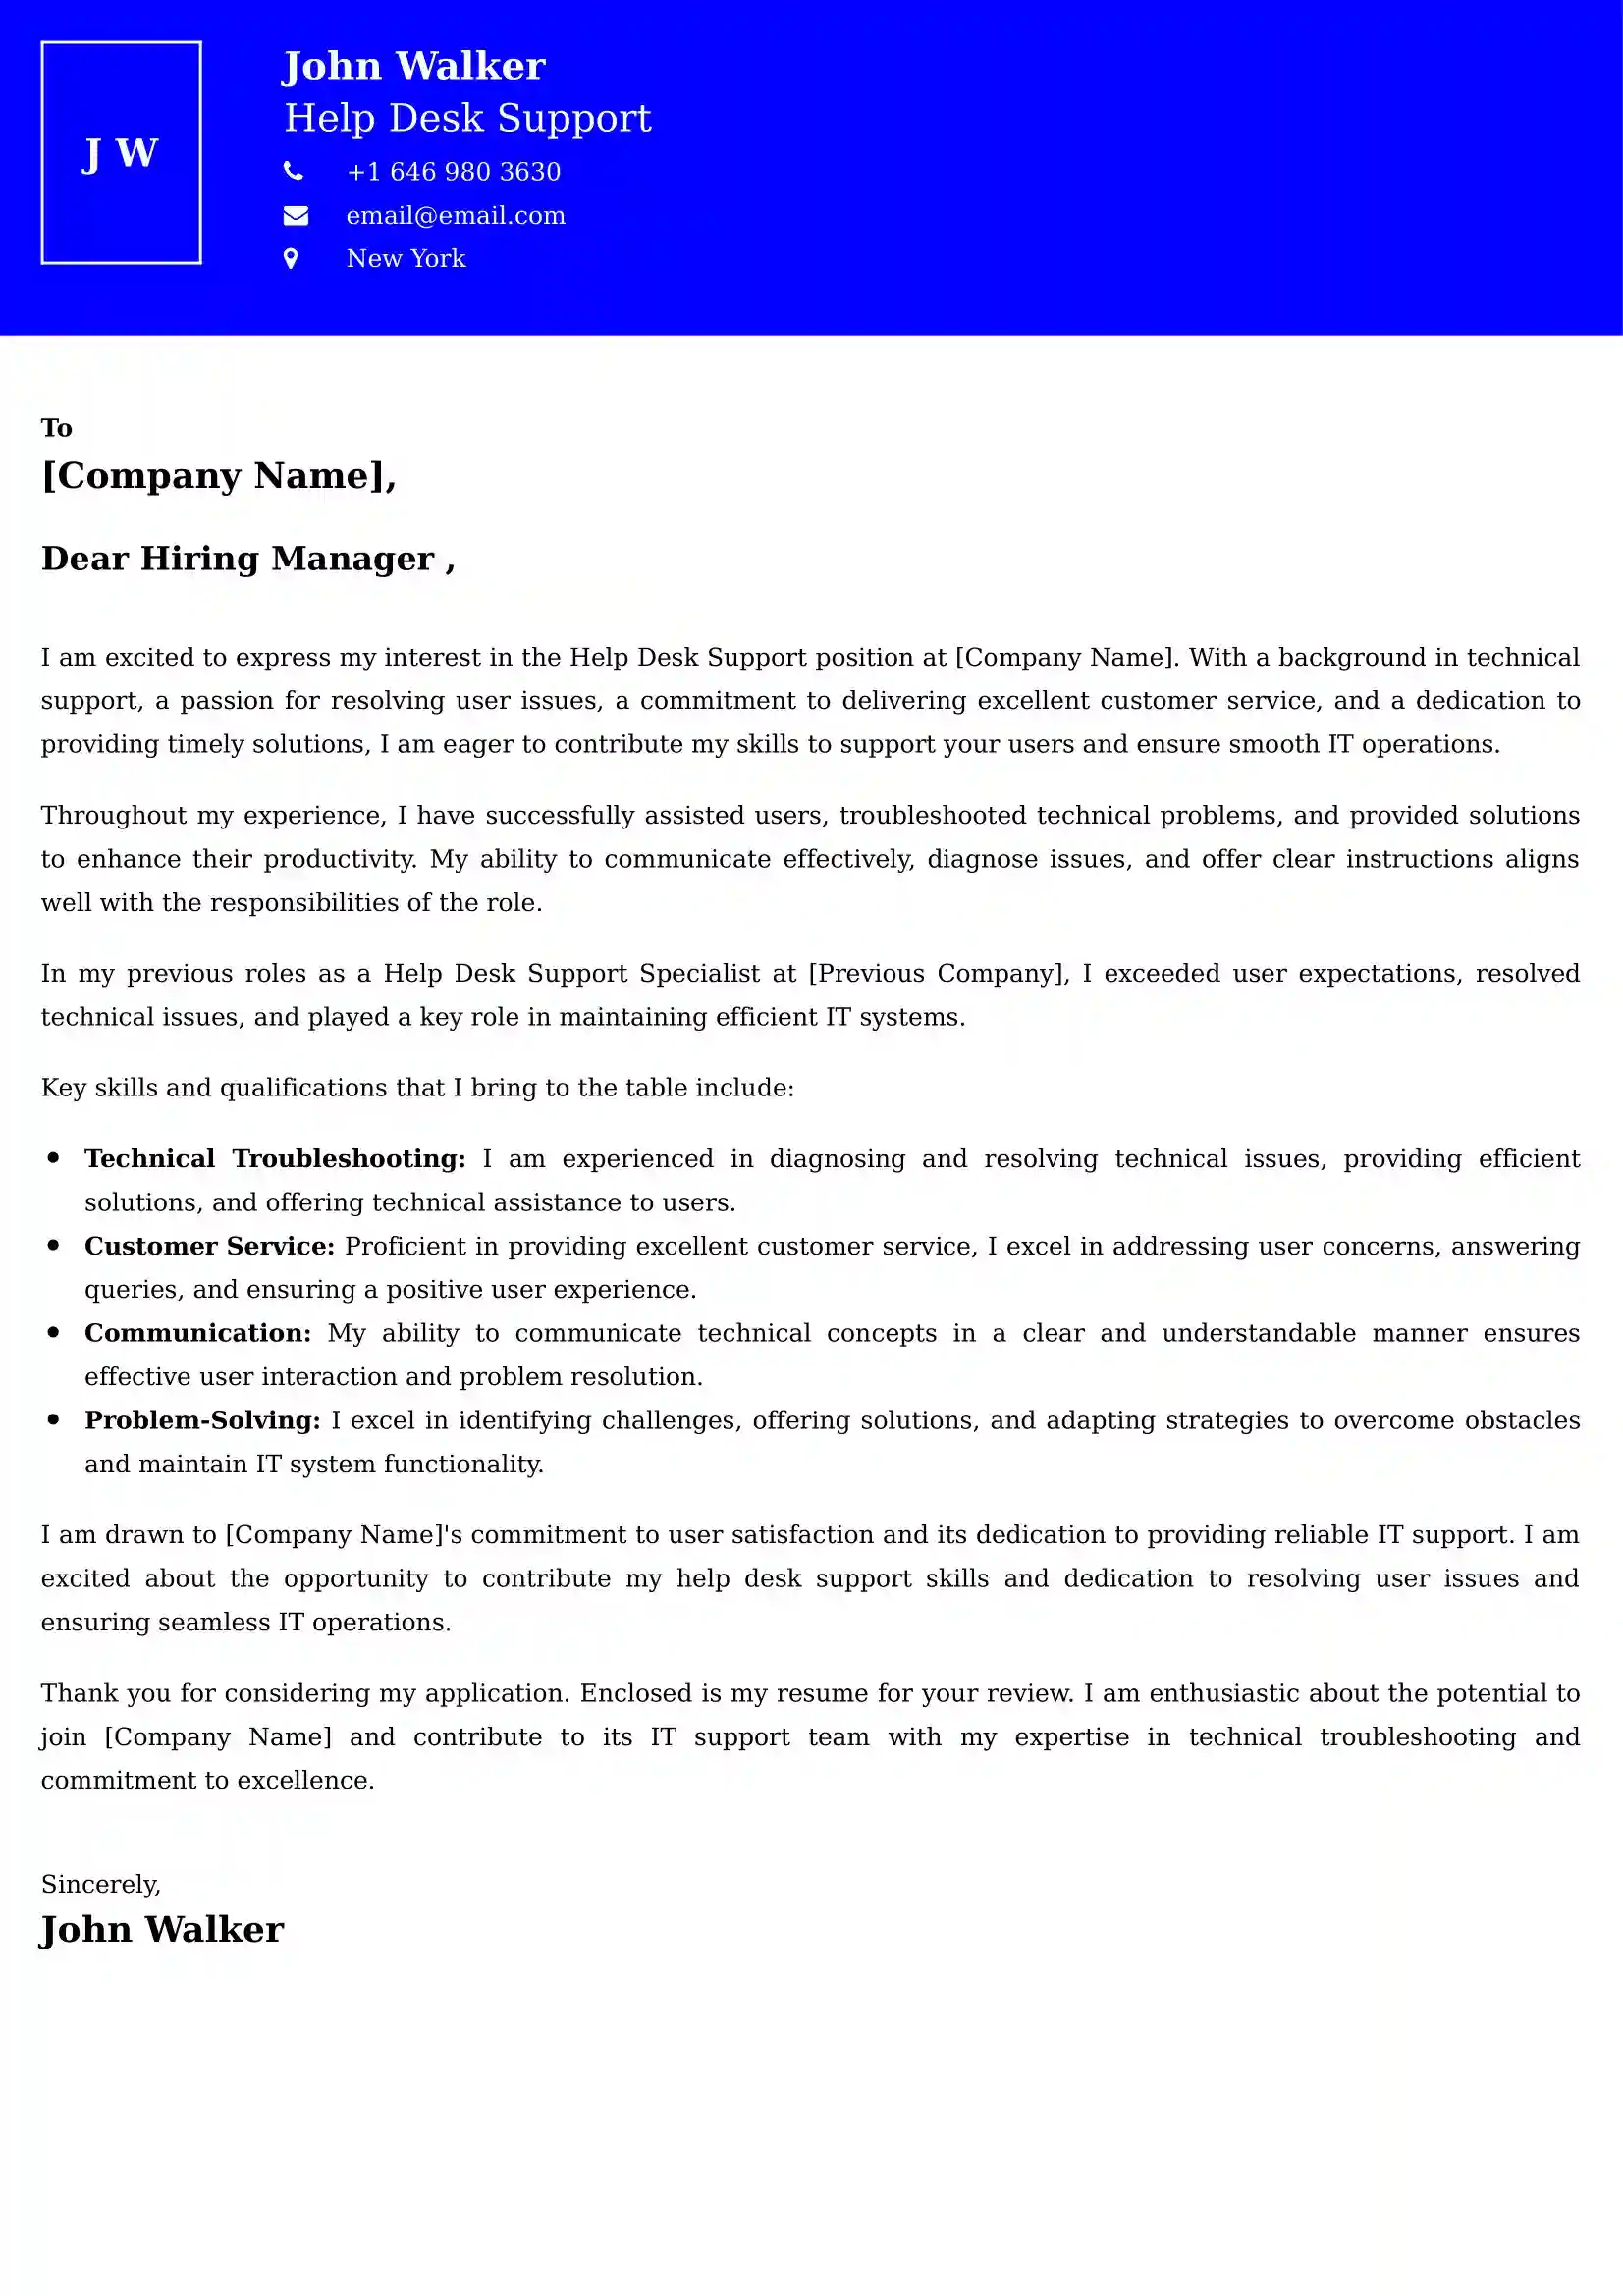 Help Desk Support Cover Letter Examples for UK 